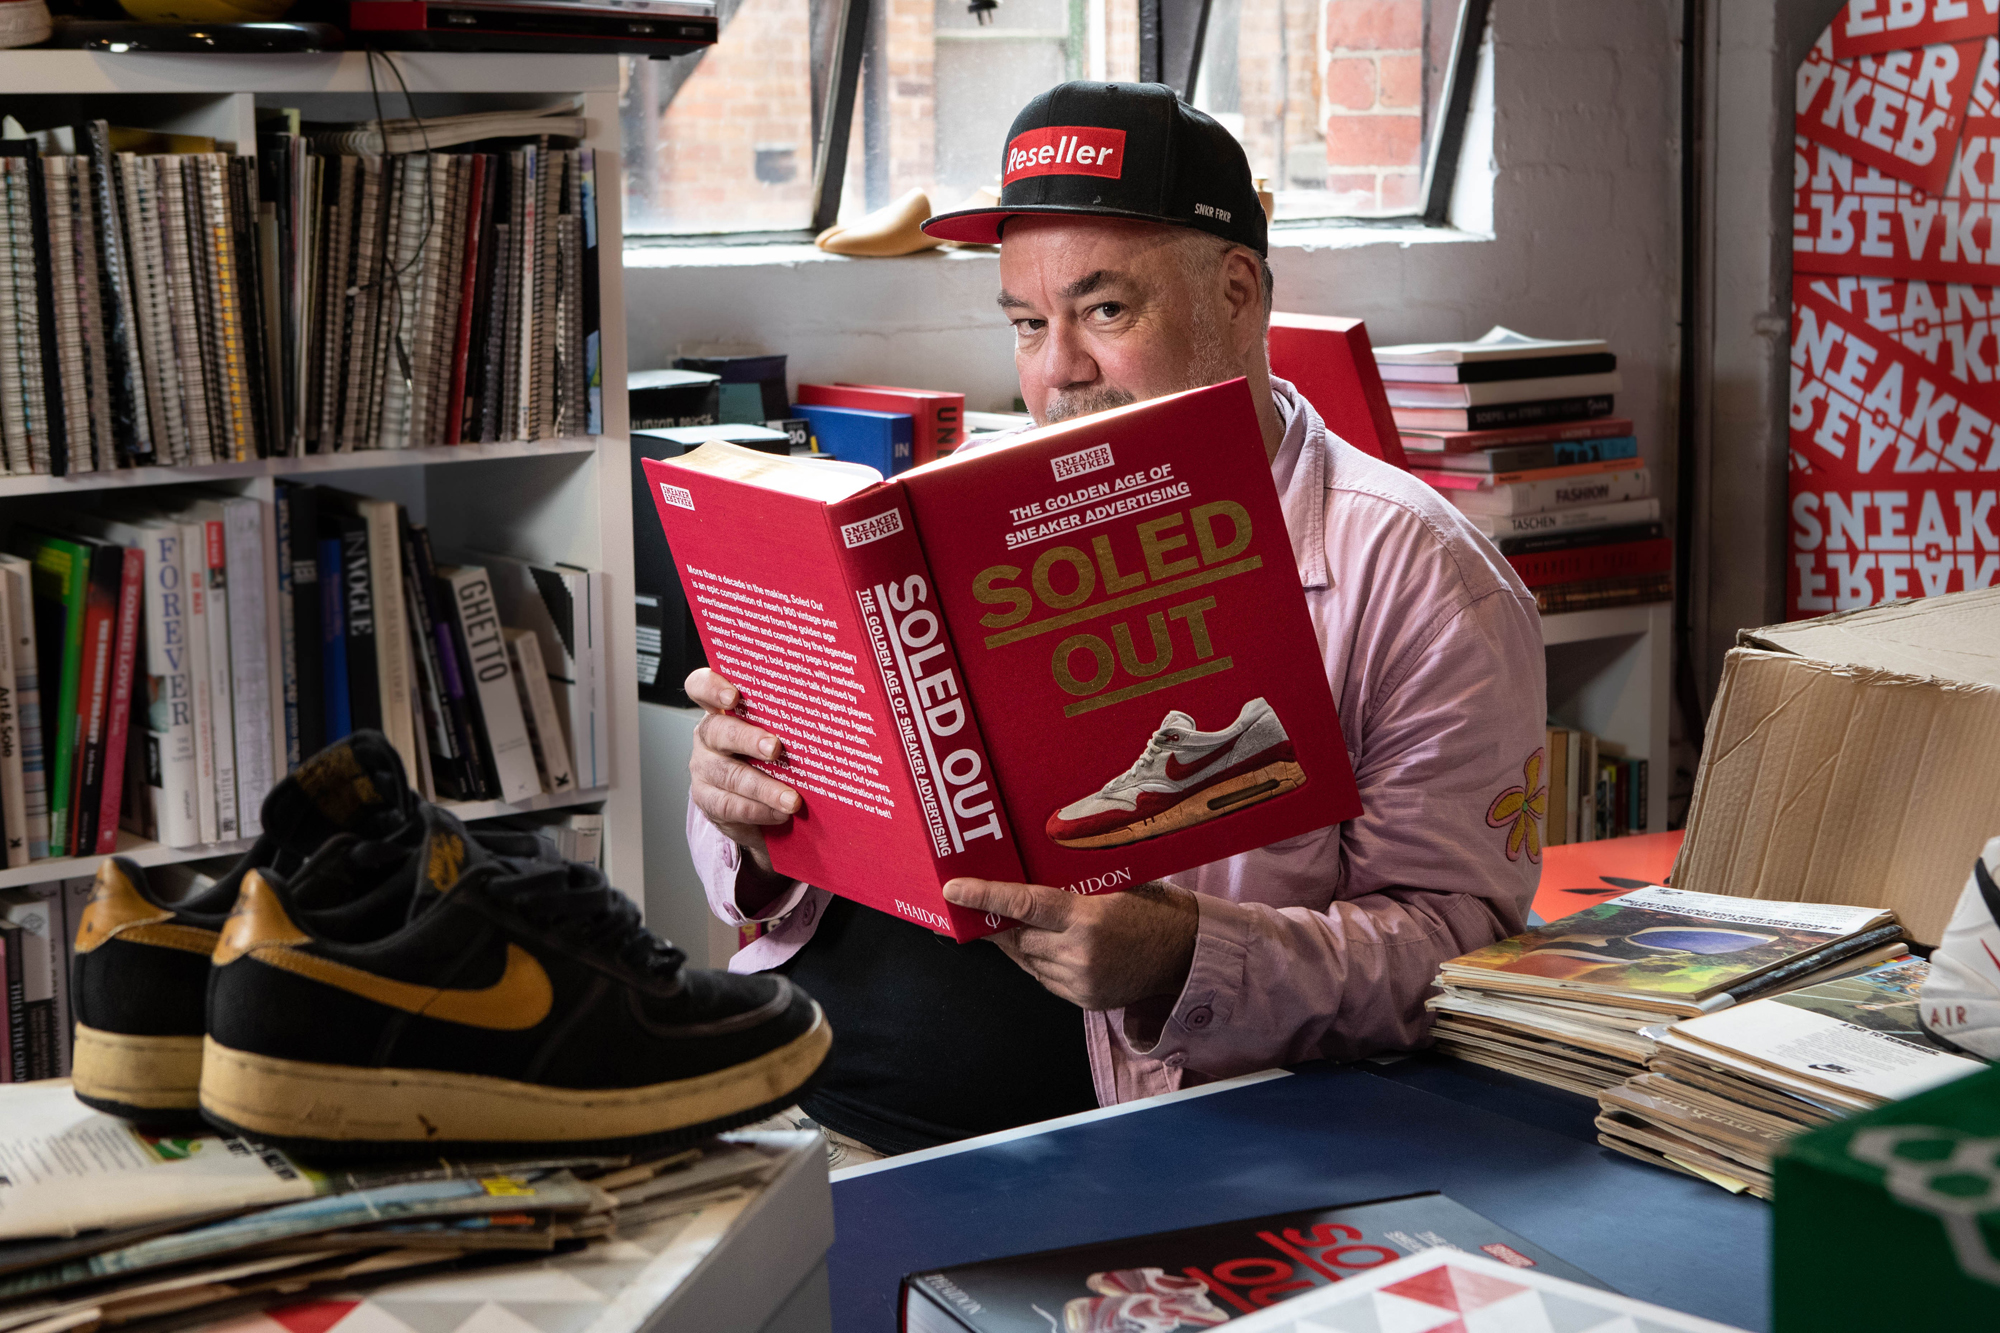 Woody of Sneaker Freaker magazine on Soled Out, the importance of the Air Max, the cringey side of old ads, and sneaker campaigns’ enduring appeal